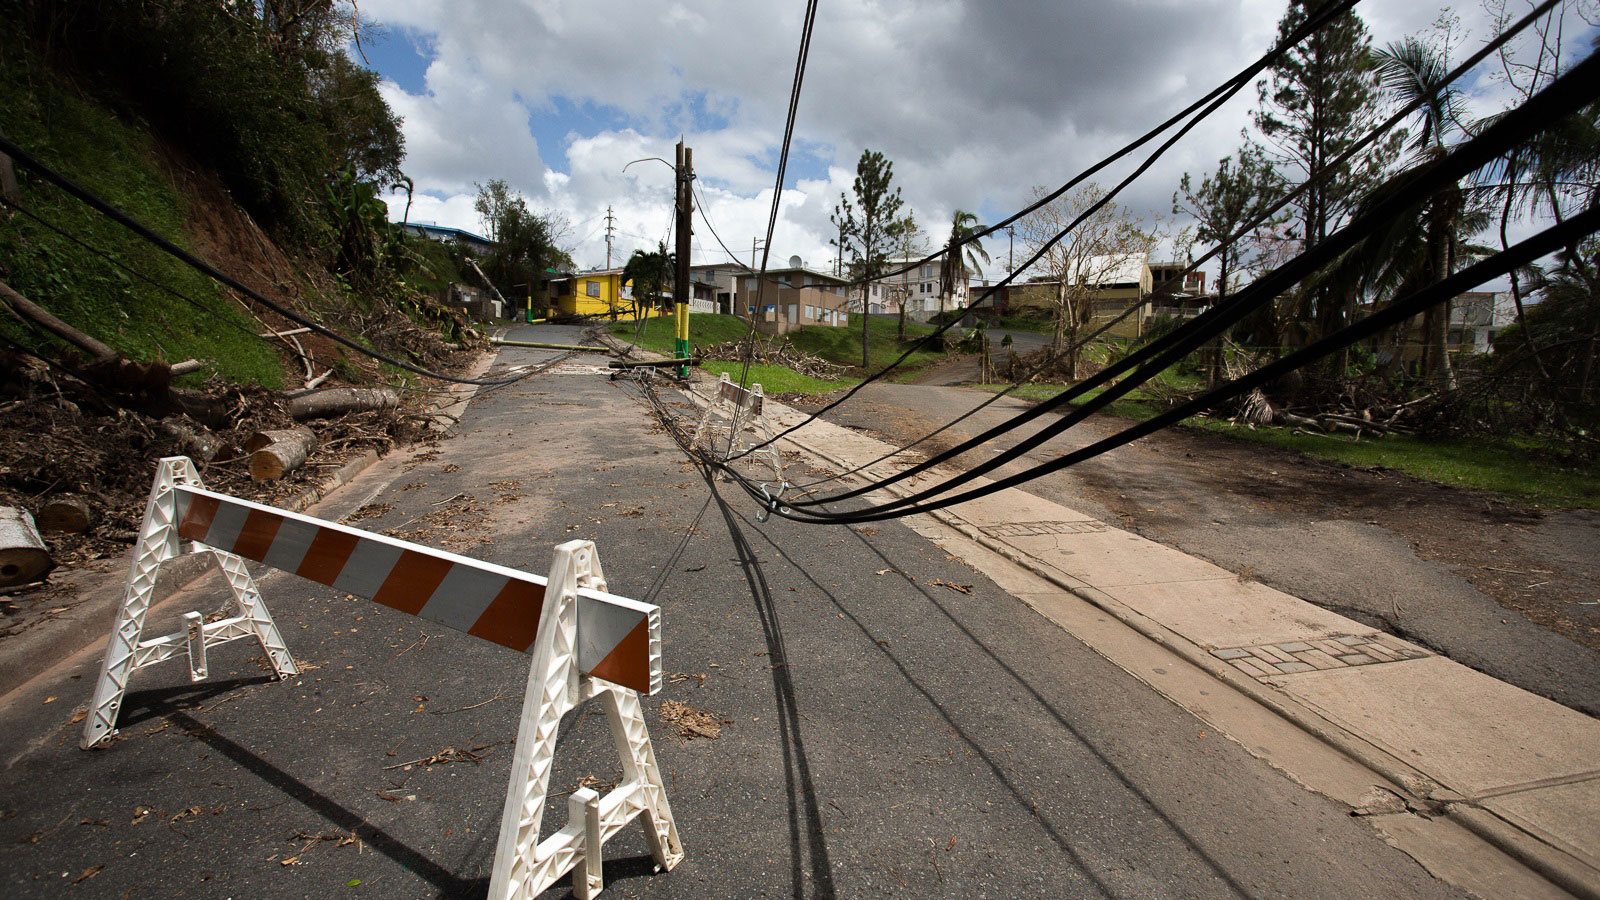 Downed power lines tell only part of the story of Hurricane Maria’s devastation.